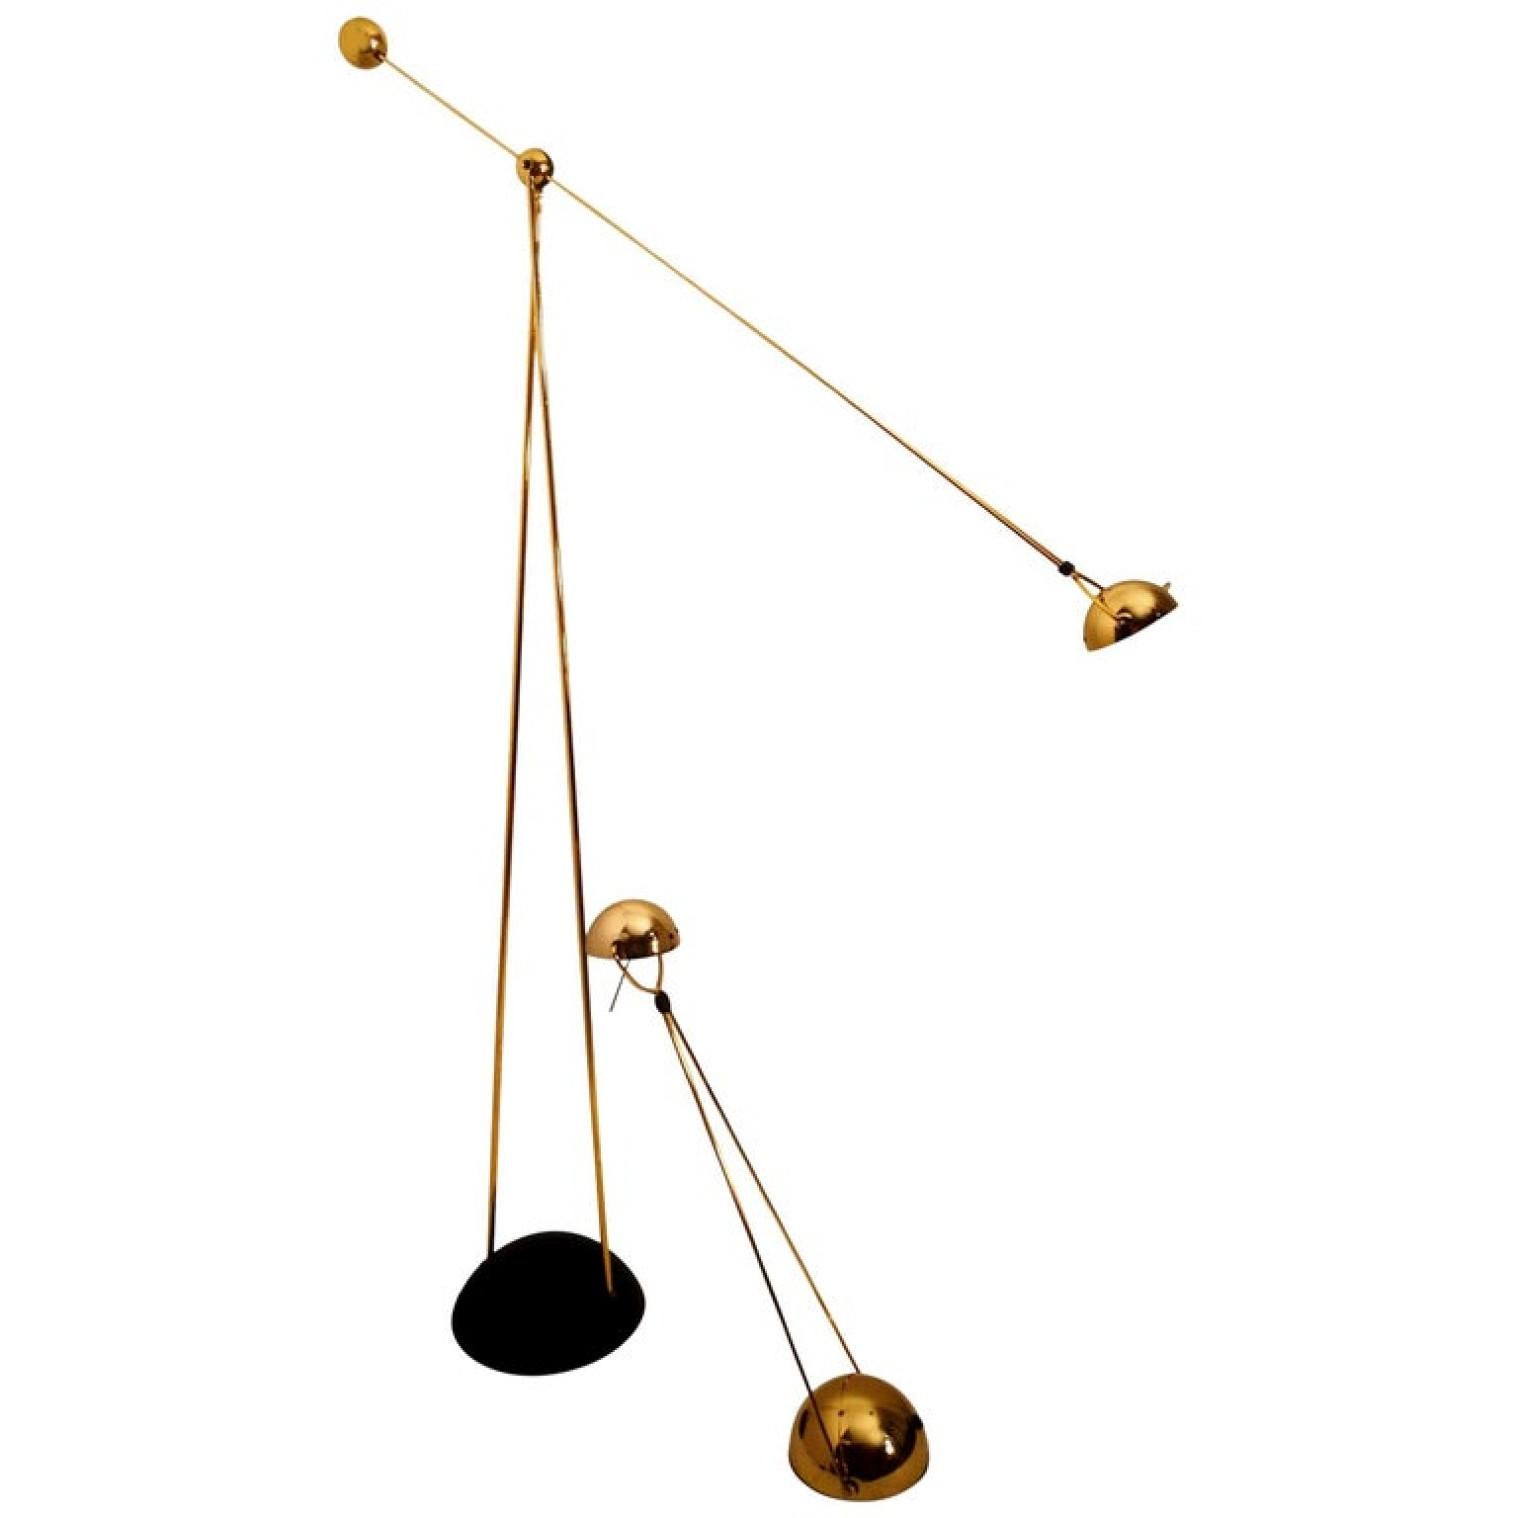 Minimalist, modern, tall and elegant counterweight halogen floor and wall lamp designed in 1983 by Paolo Francesco Piva. With high quality material and great attention to detail.

Measures of the table lamp
Diameter 5.51 in. (14 cm) x height